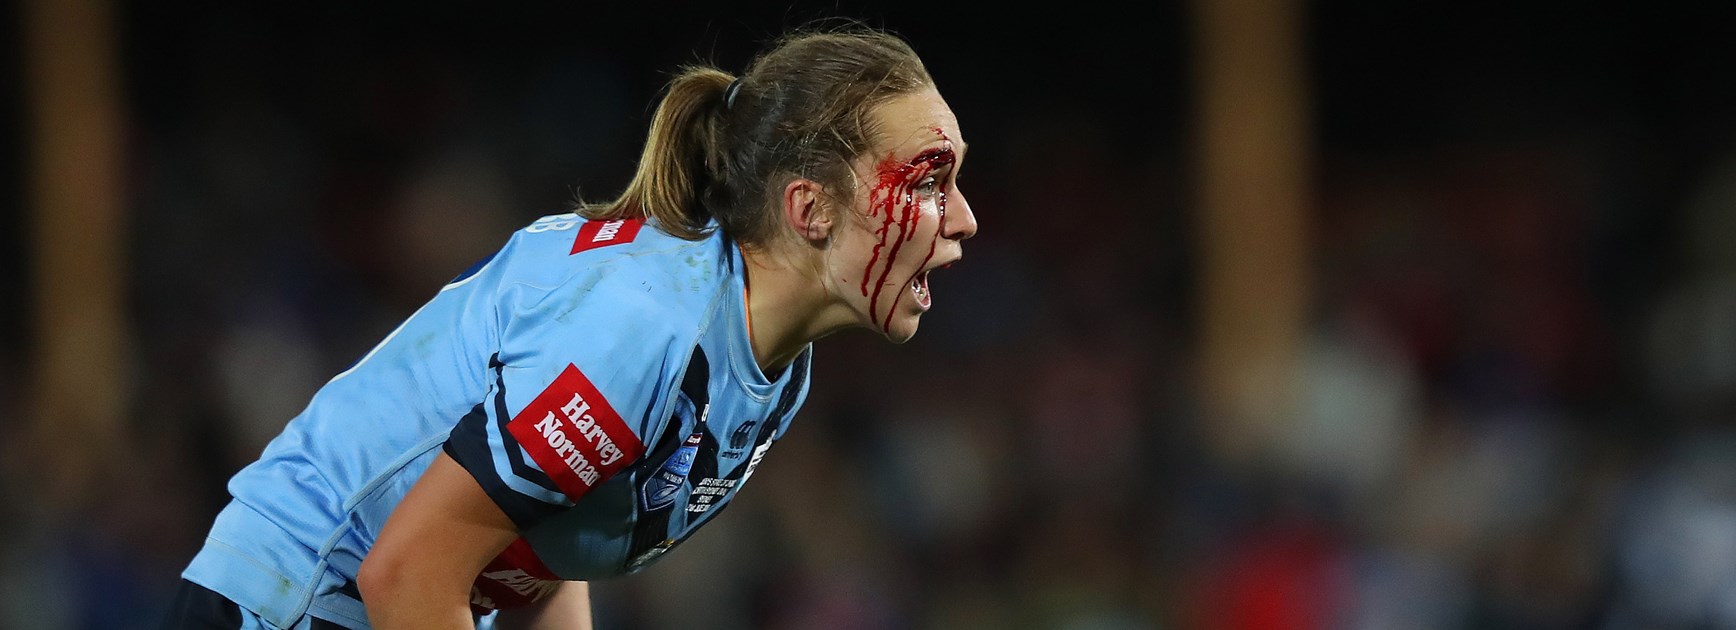 Spilling a bit of blood for your team is what Origin's about